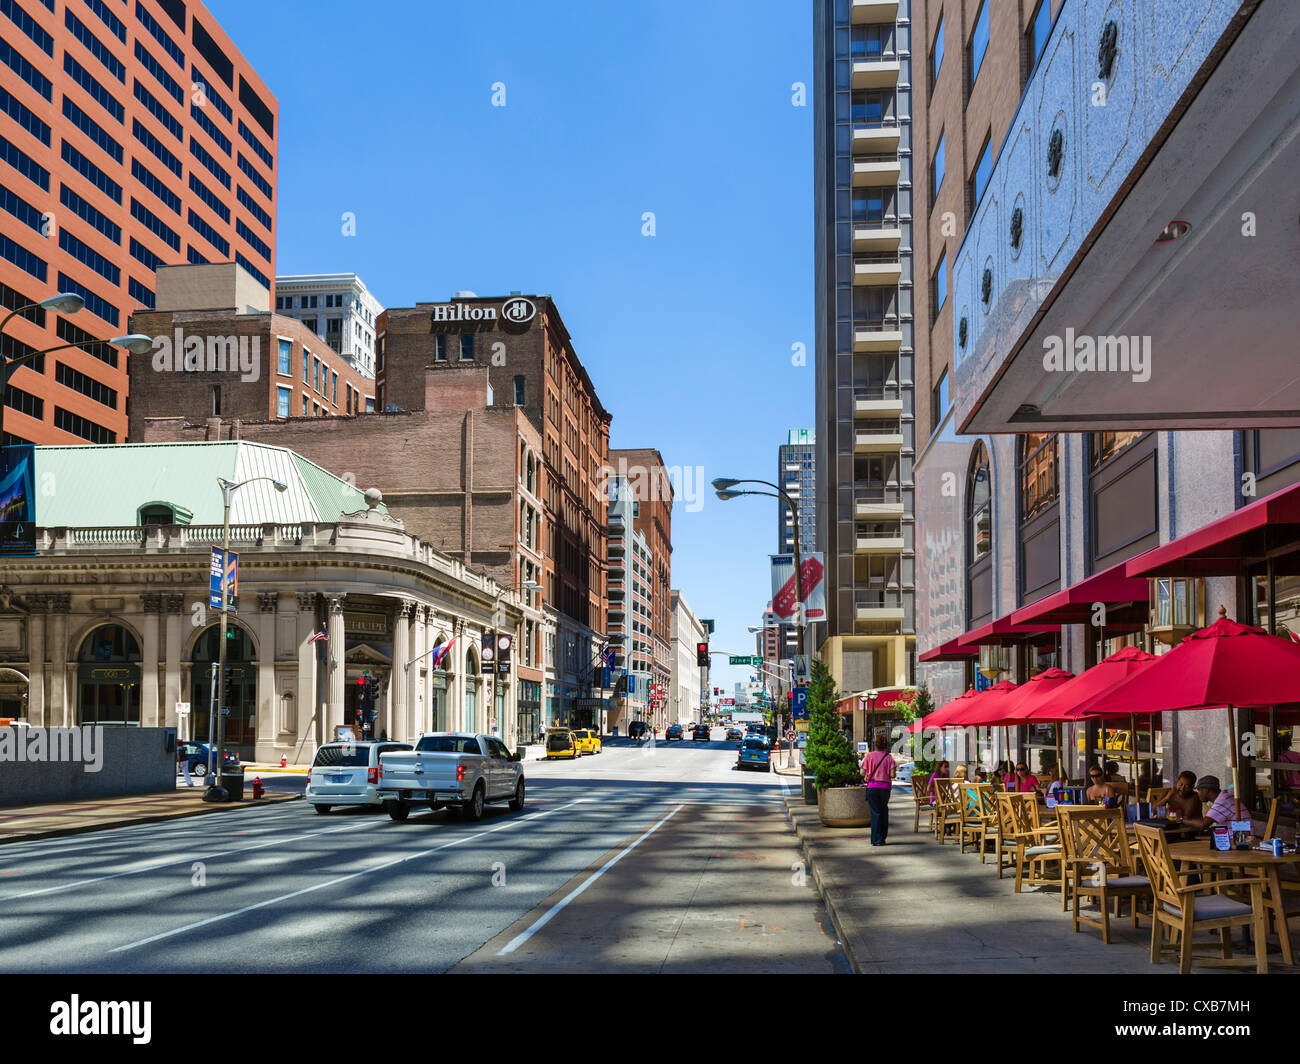 Hotels and stores on N 4th Street in downtown St Louis, Missouri, USA Stock Photo: 50649329 - Alamy